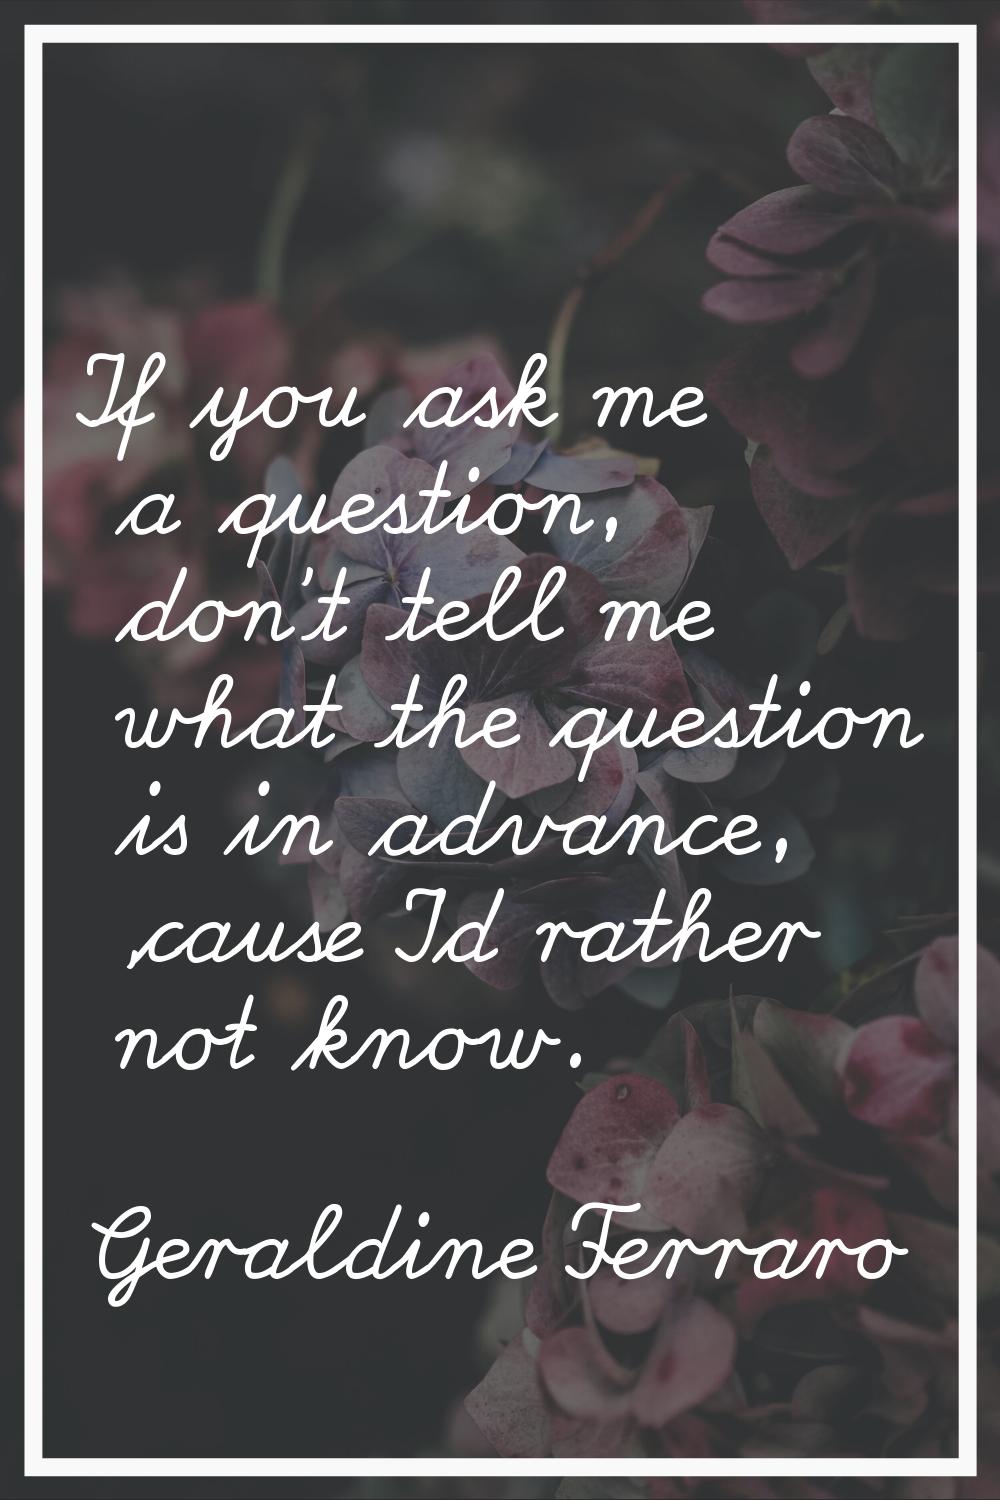 If you ask me a question, don't tell me what the question is in advance, 'cause I'd rather not know